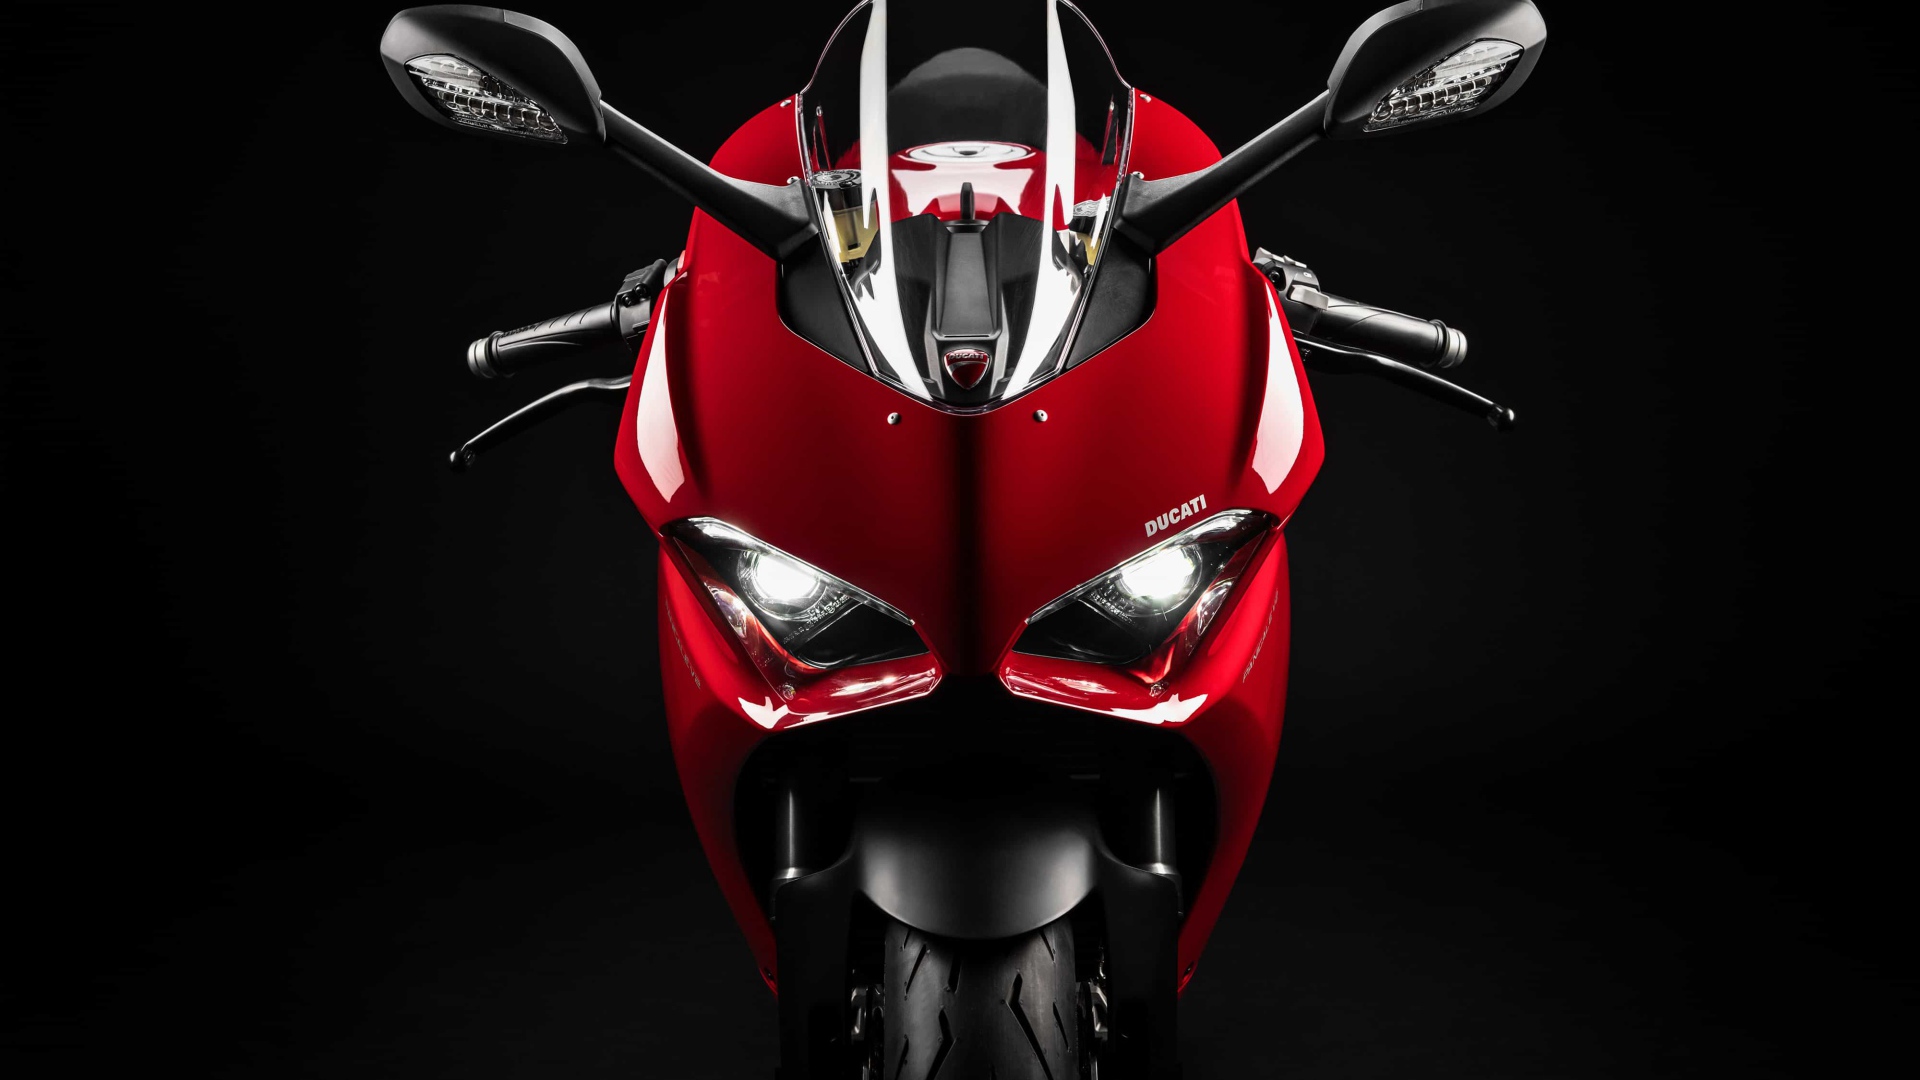 Red motorcycle Ducati Panigale v2 front view Desktop wallpapers 1920x1080